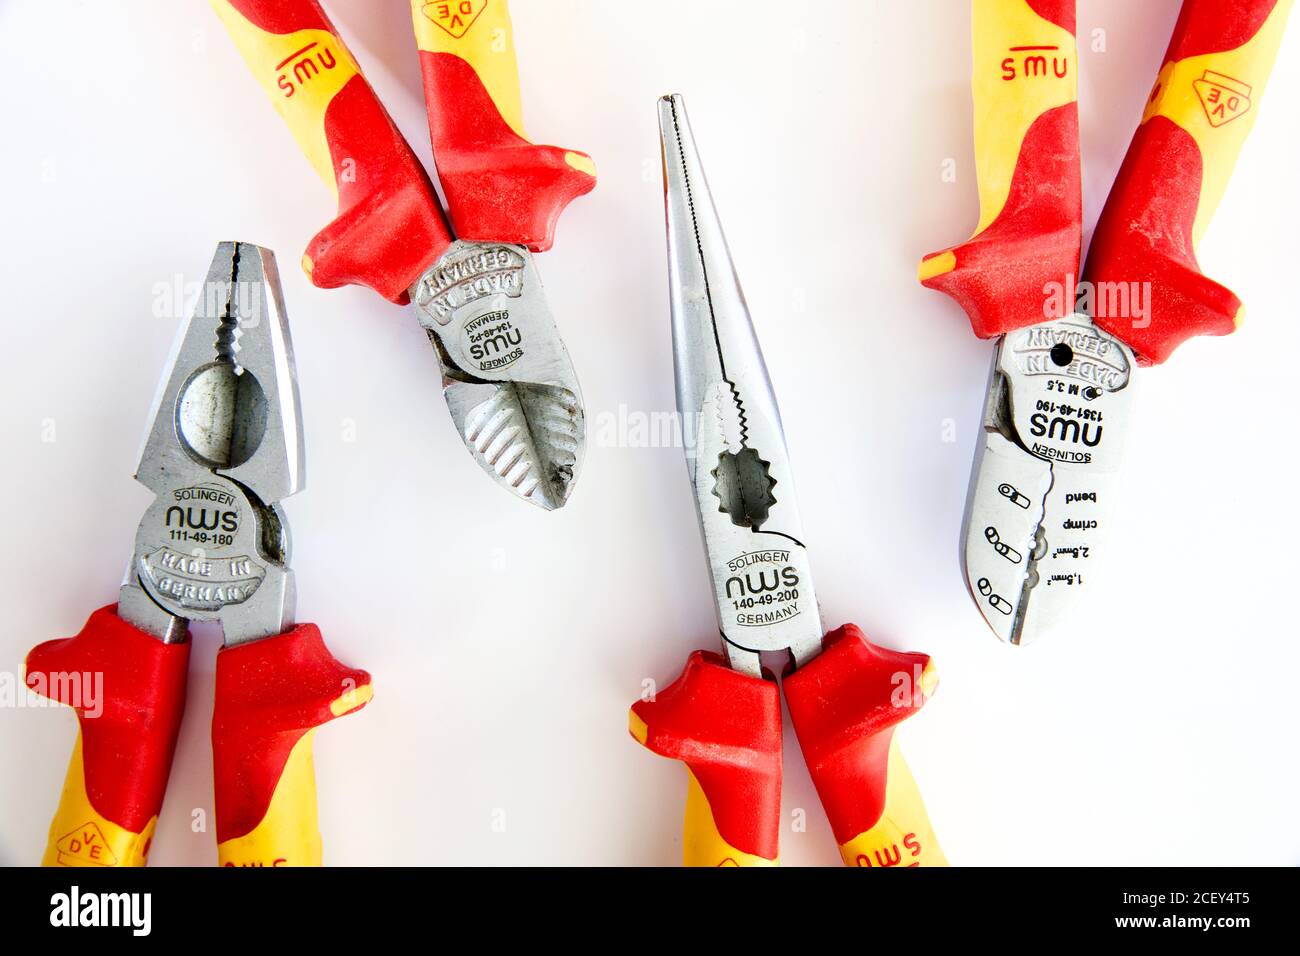 Electricians Pliers & Cutters Stock Photo